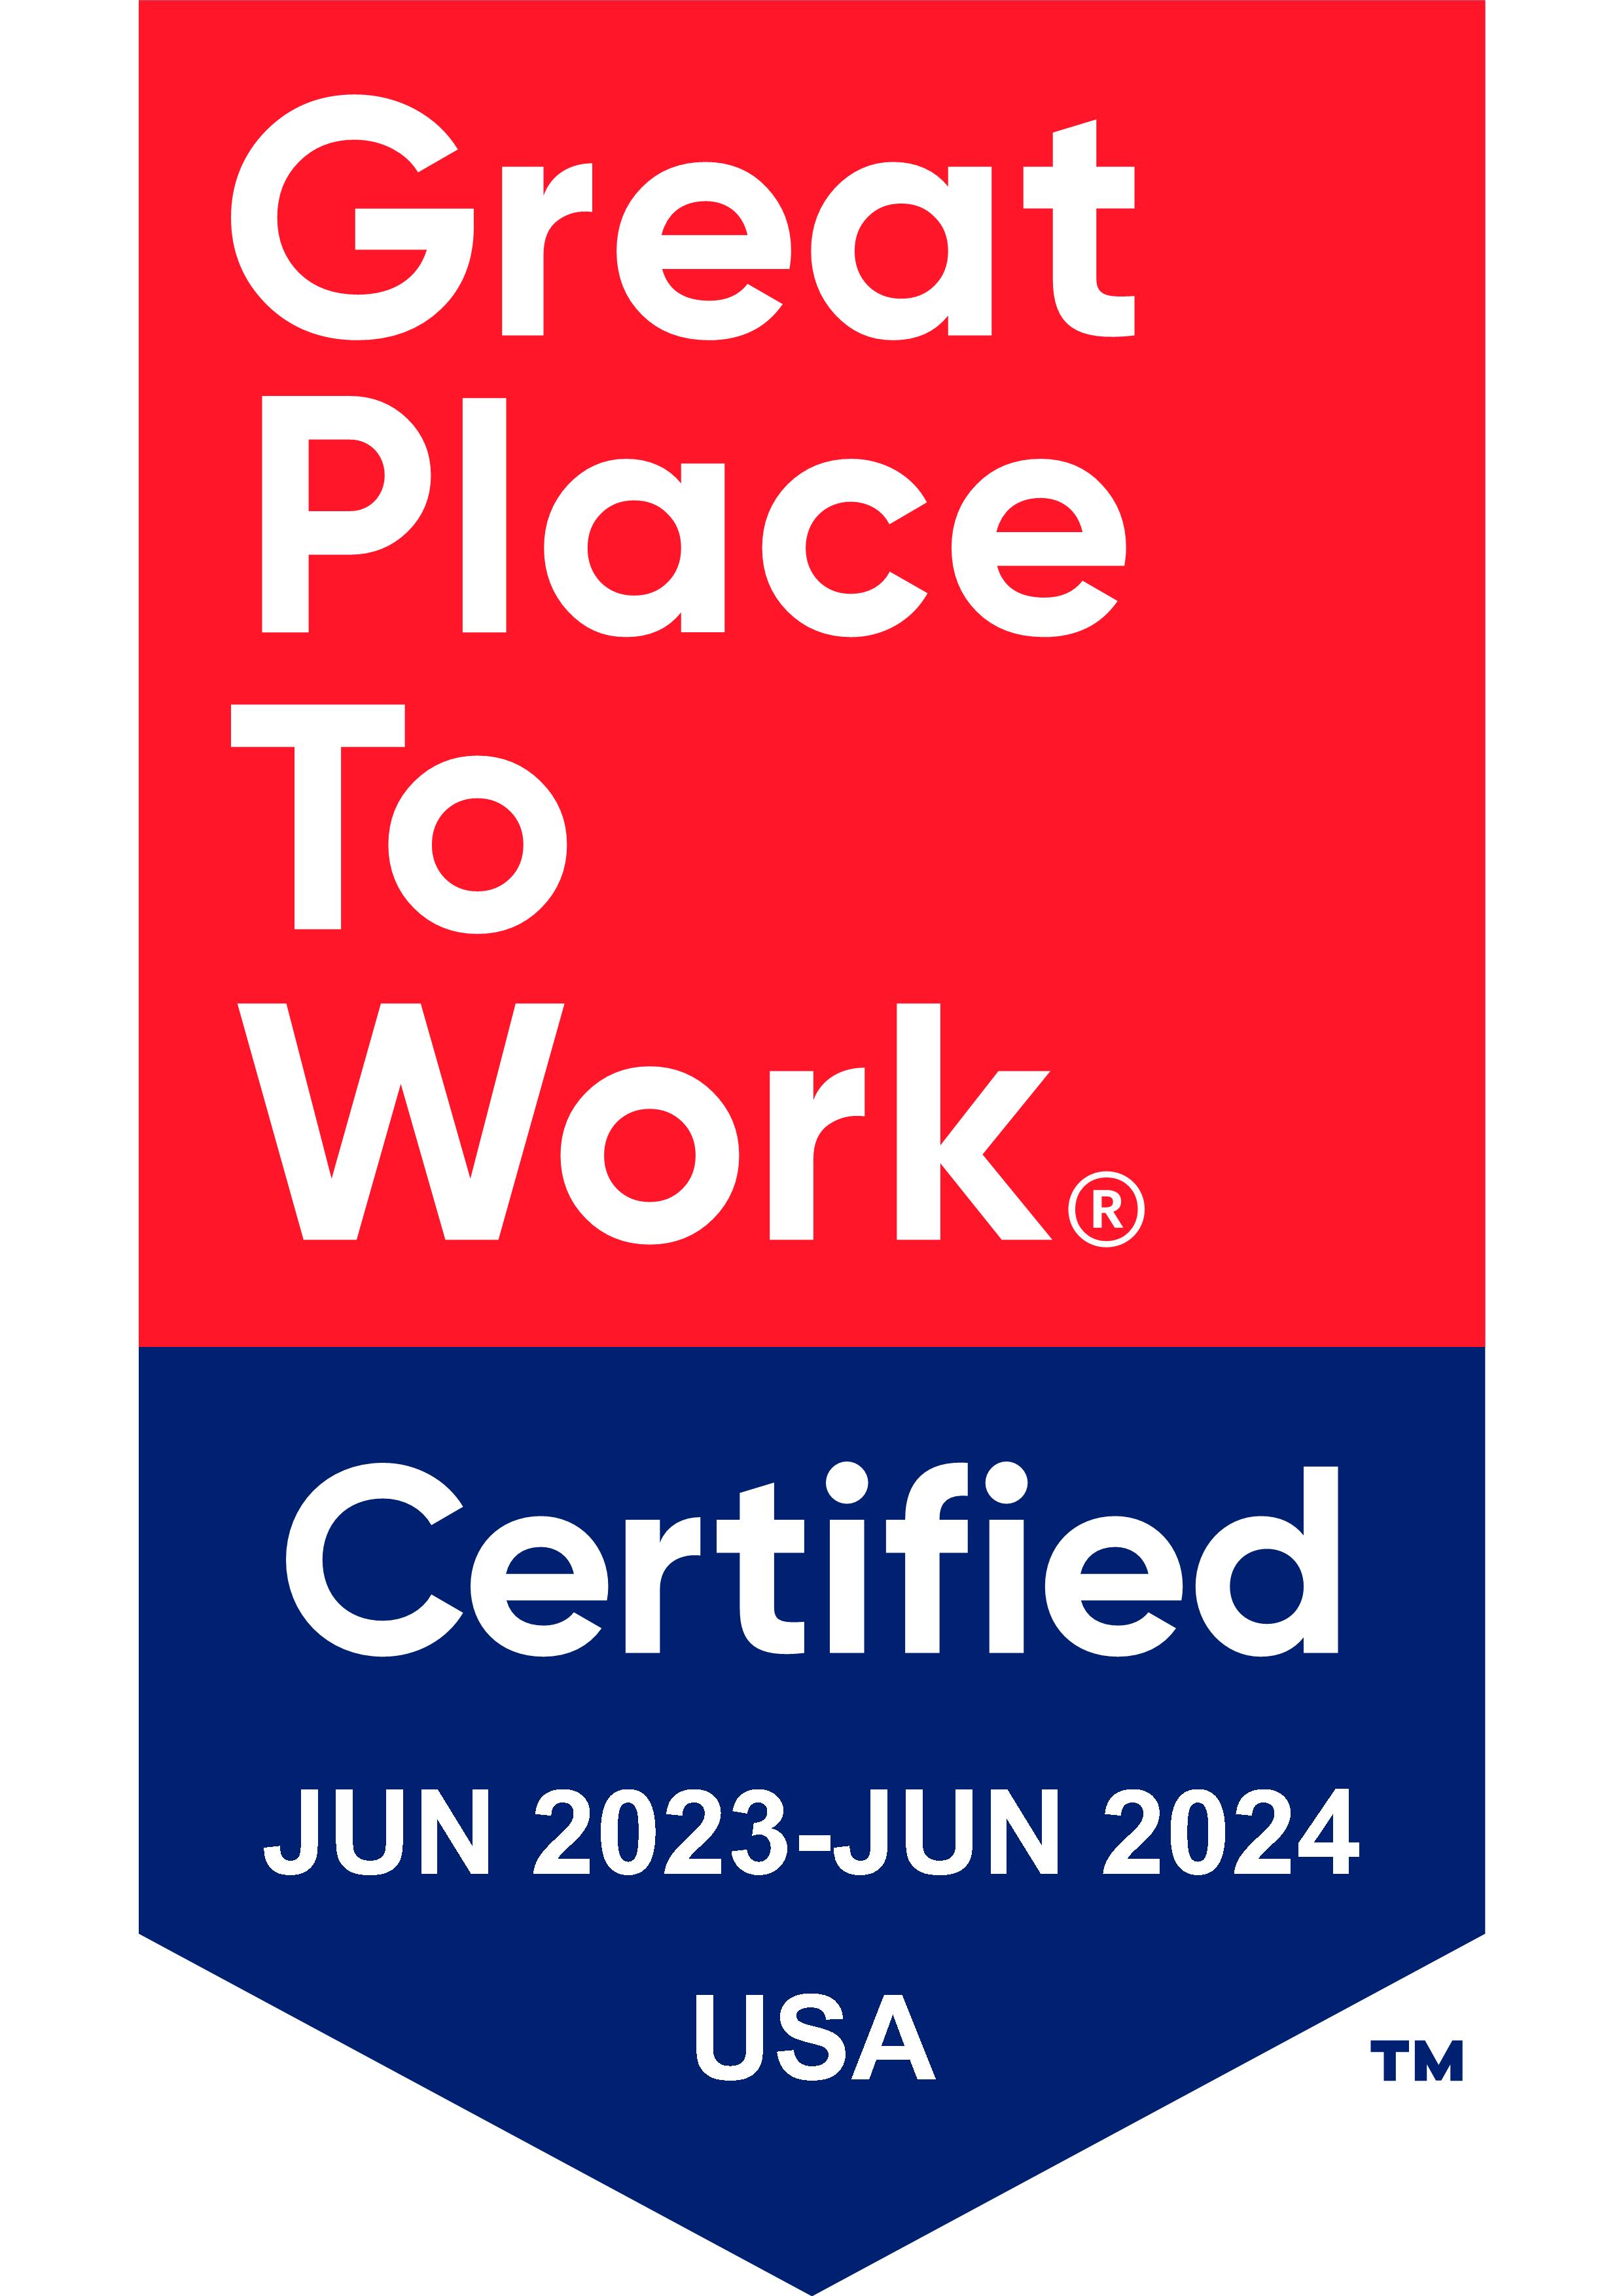 Great Place To Work | Certified | Jul 2019 - Jul 2020 USA